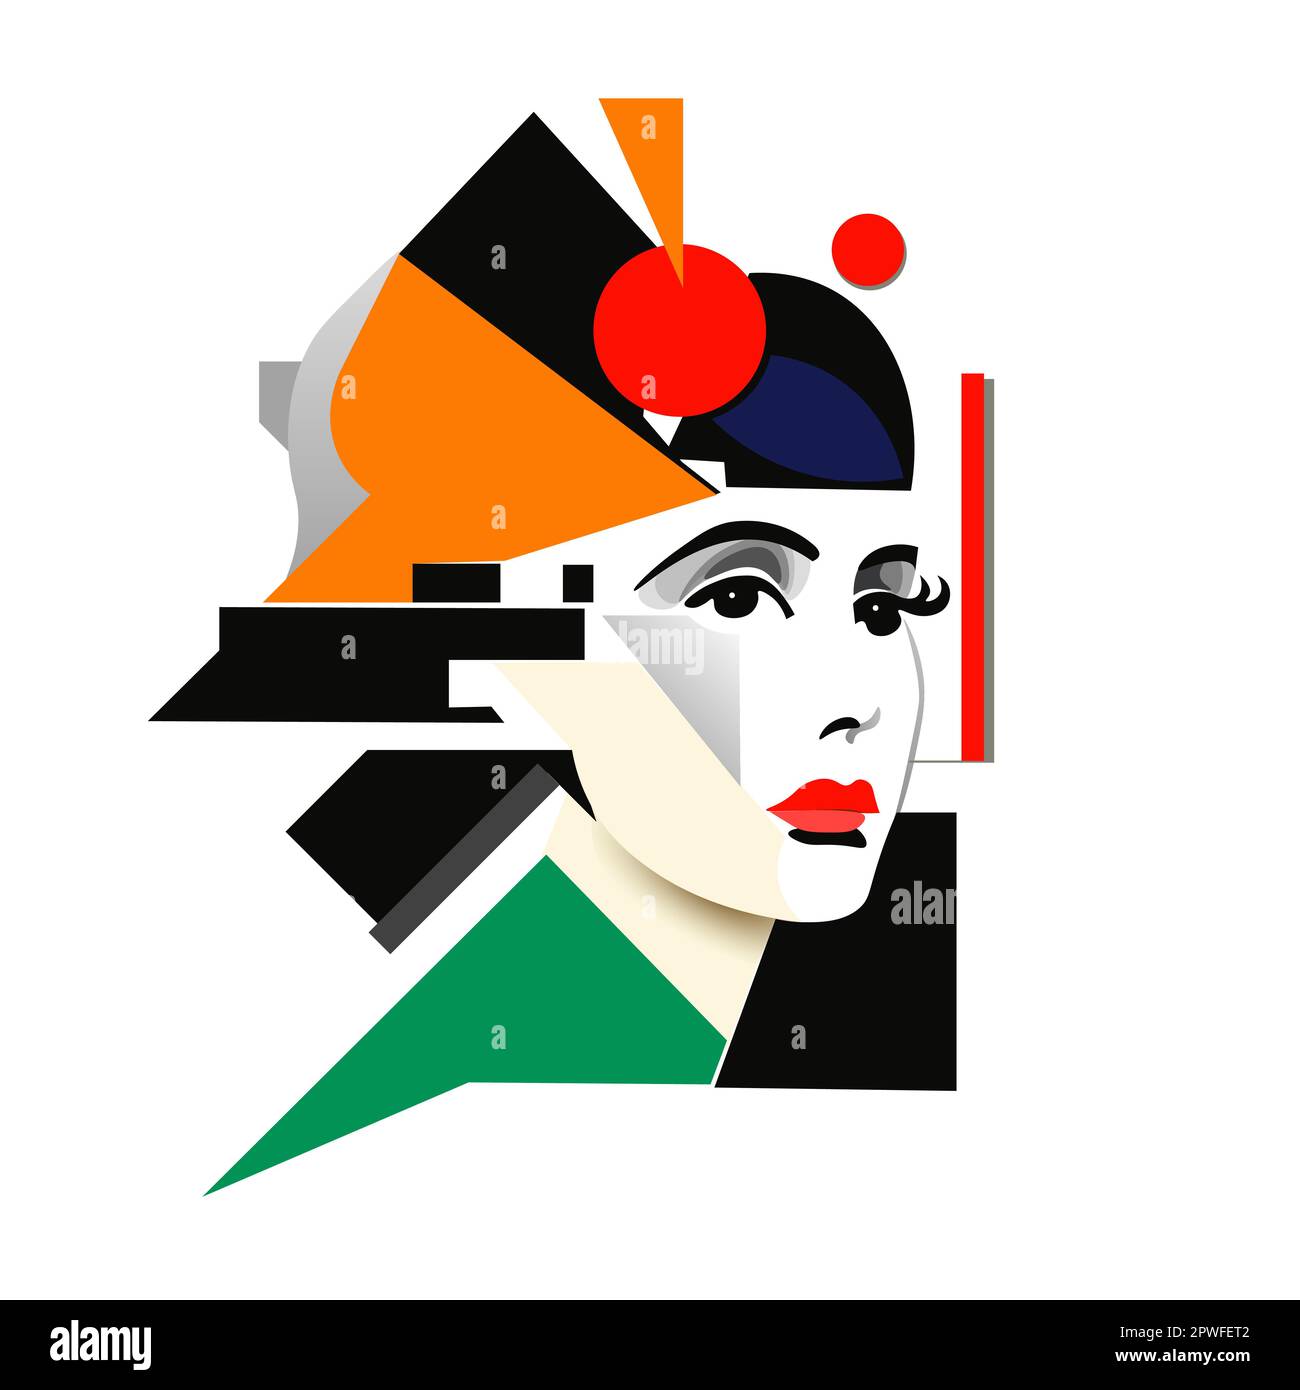 Woman face constructivism style cubism. Different geometric shapes brush stroke painting illustration Stock Vector